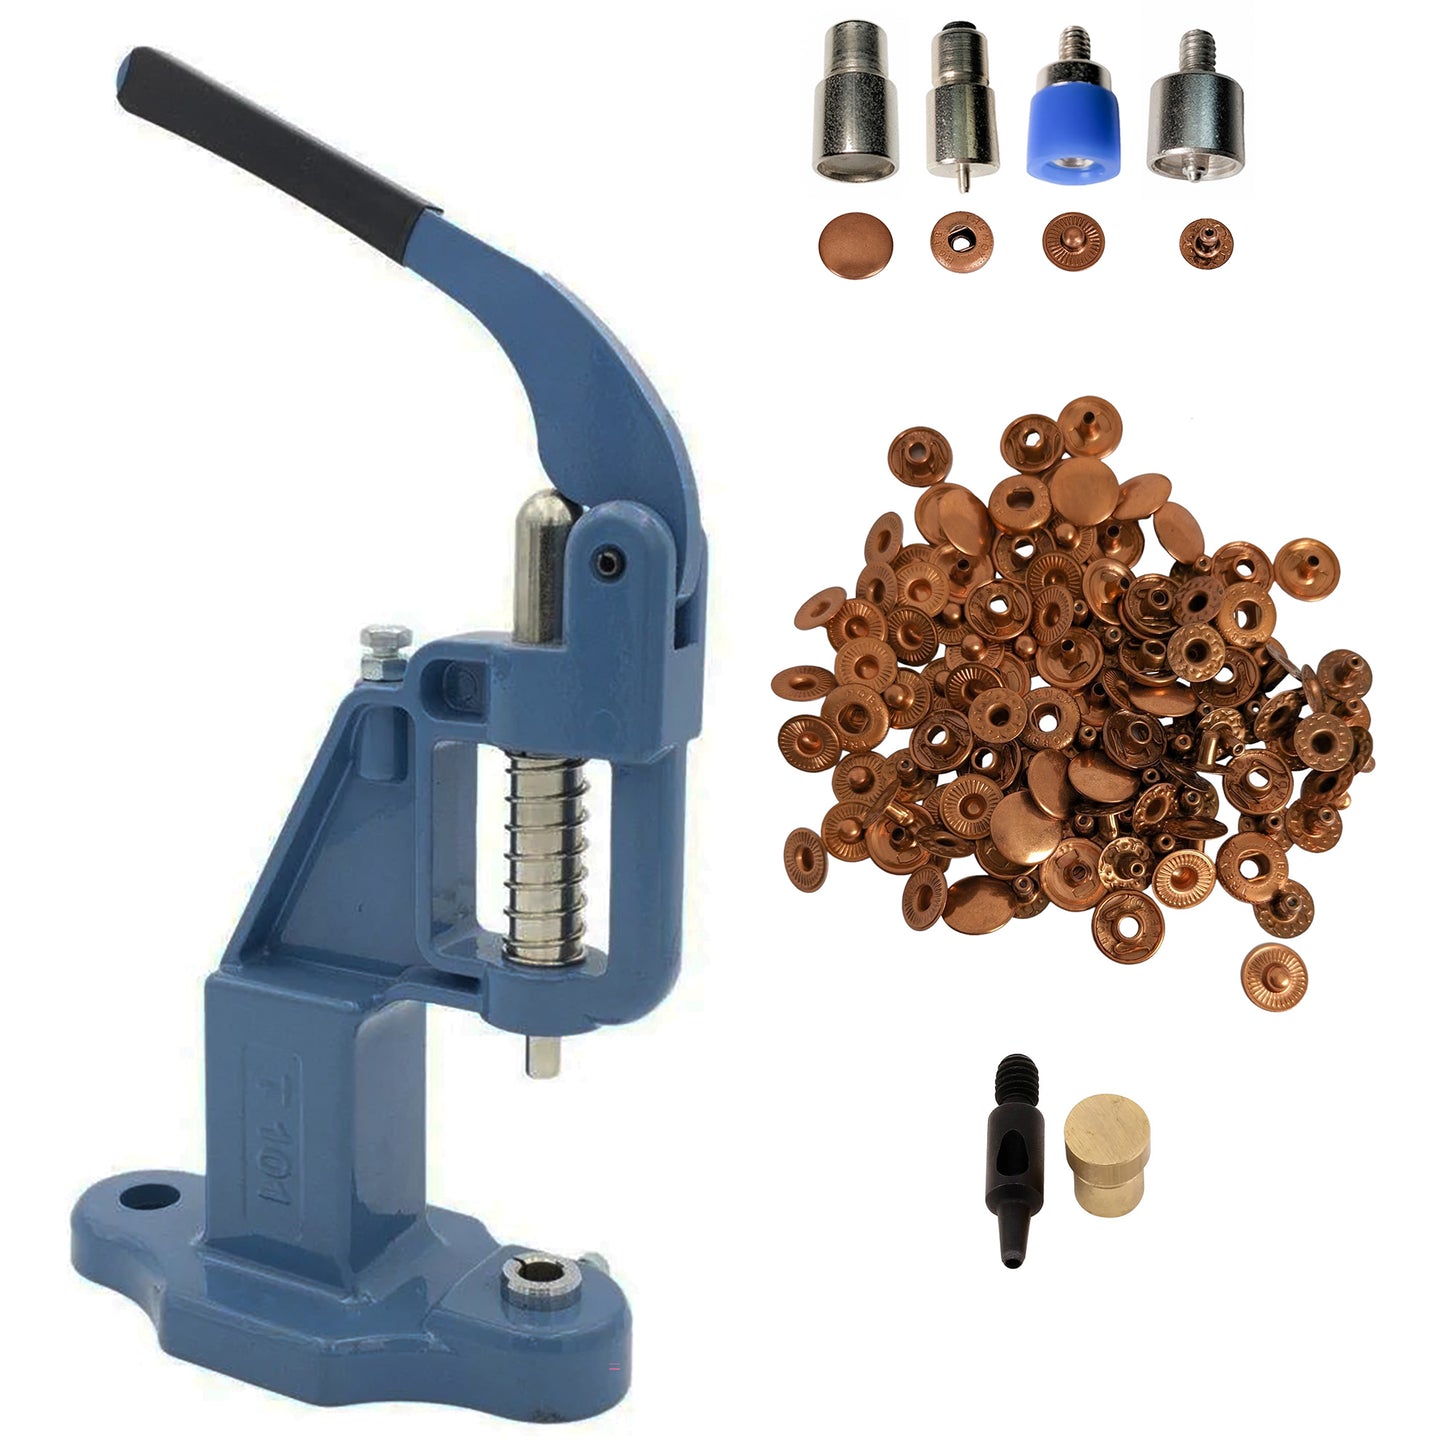 720 Sets 4 Piece 12.5mm (line 20) Fashion Spring Snap Buttons with Manual Press Machine, Dies, Hole Punch Tool